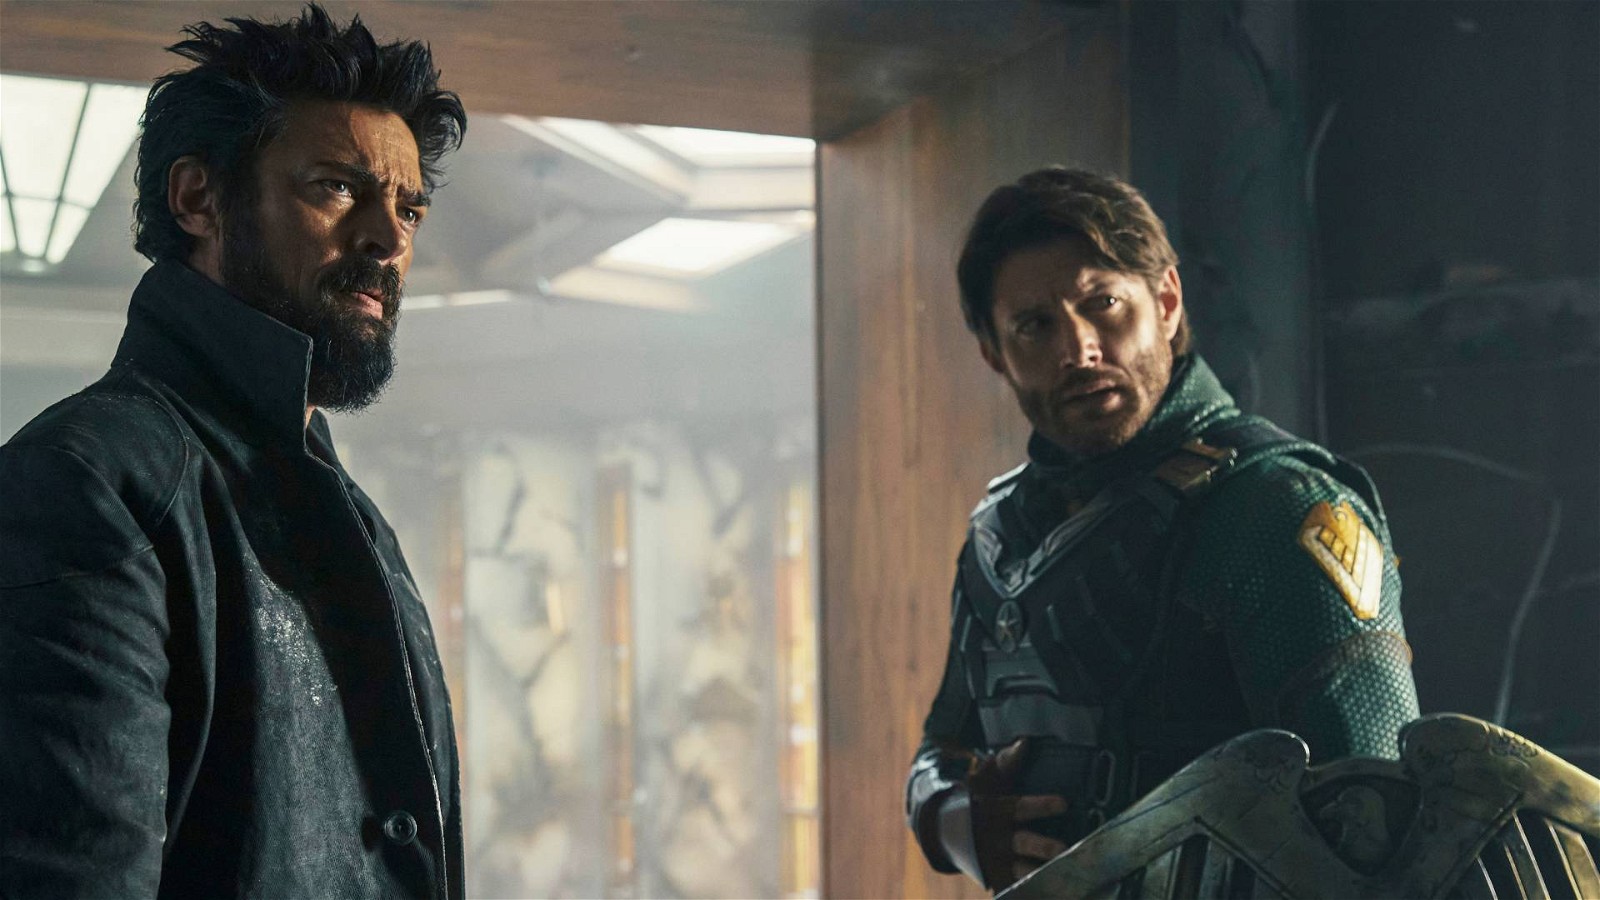 Jensen Ackles and Karl Urban in a still from The Boys